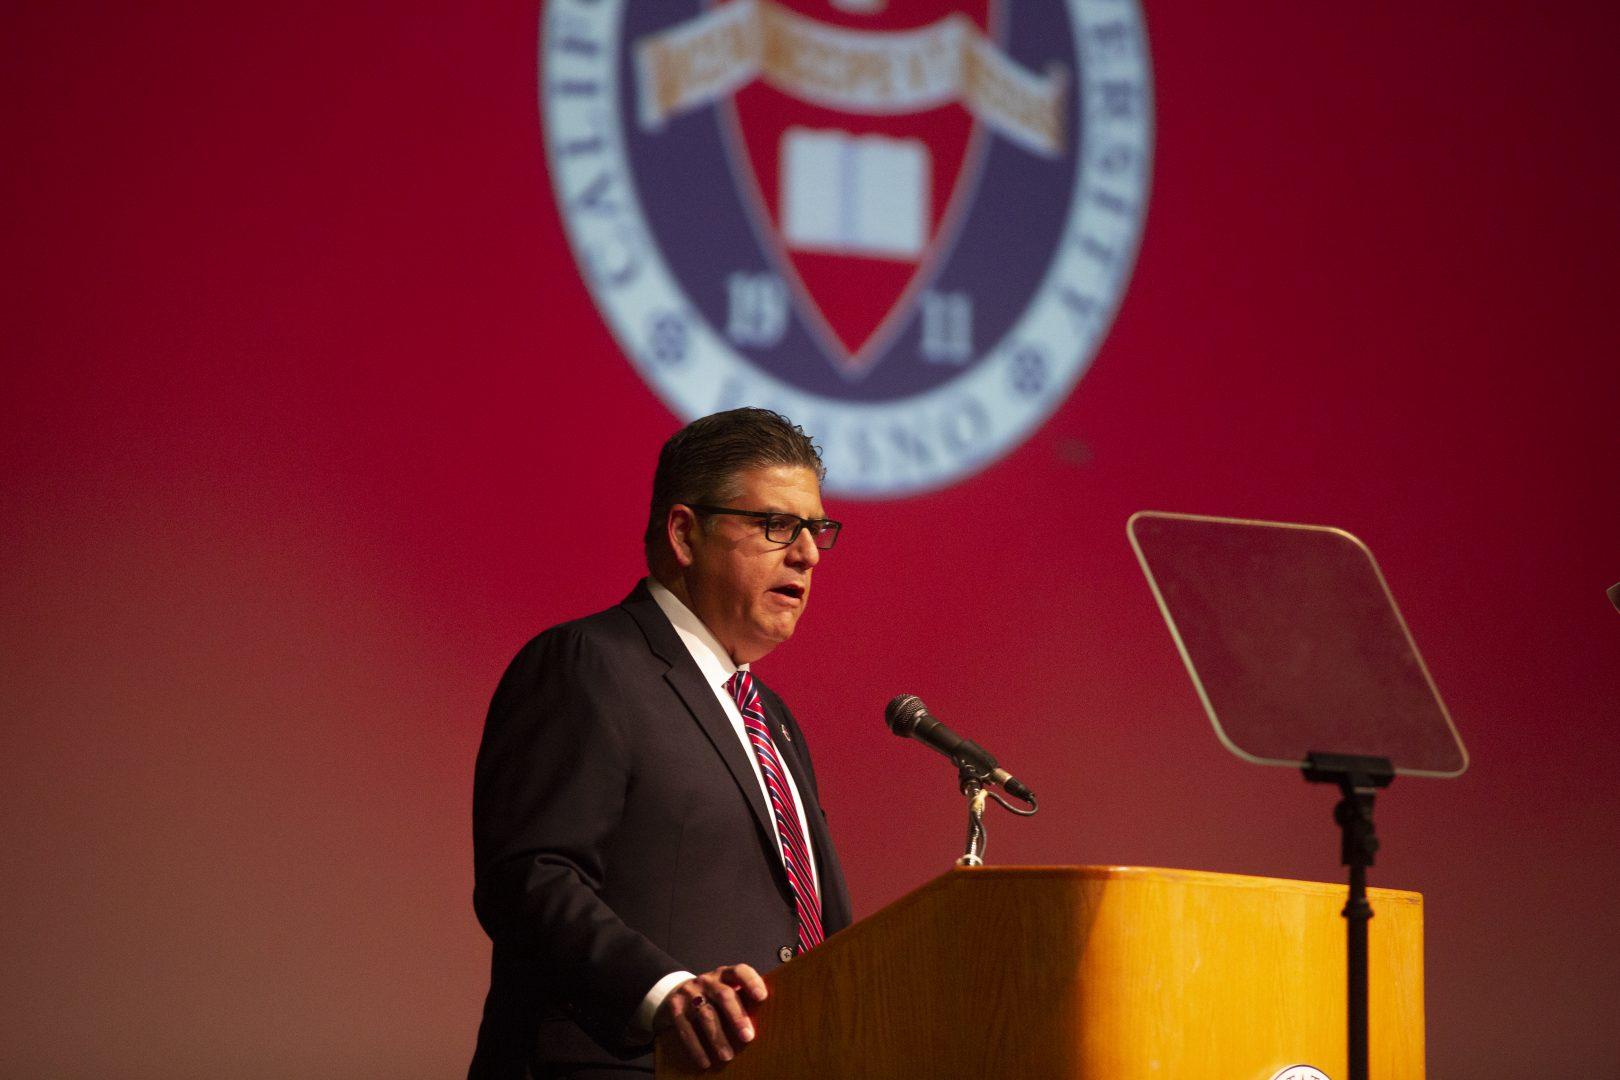 Former Fresno State president and CSU chancellor Joseph Castro at the 2019 Fall Assembly on Aug. 19 in the Satellite Student Union.